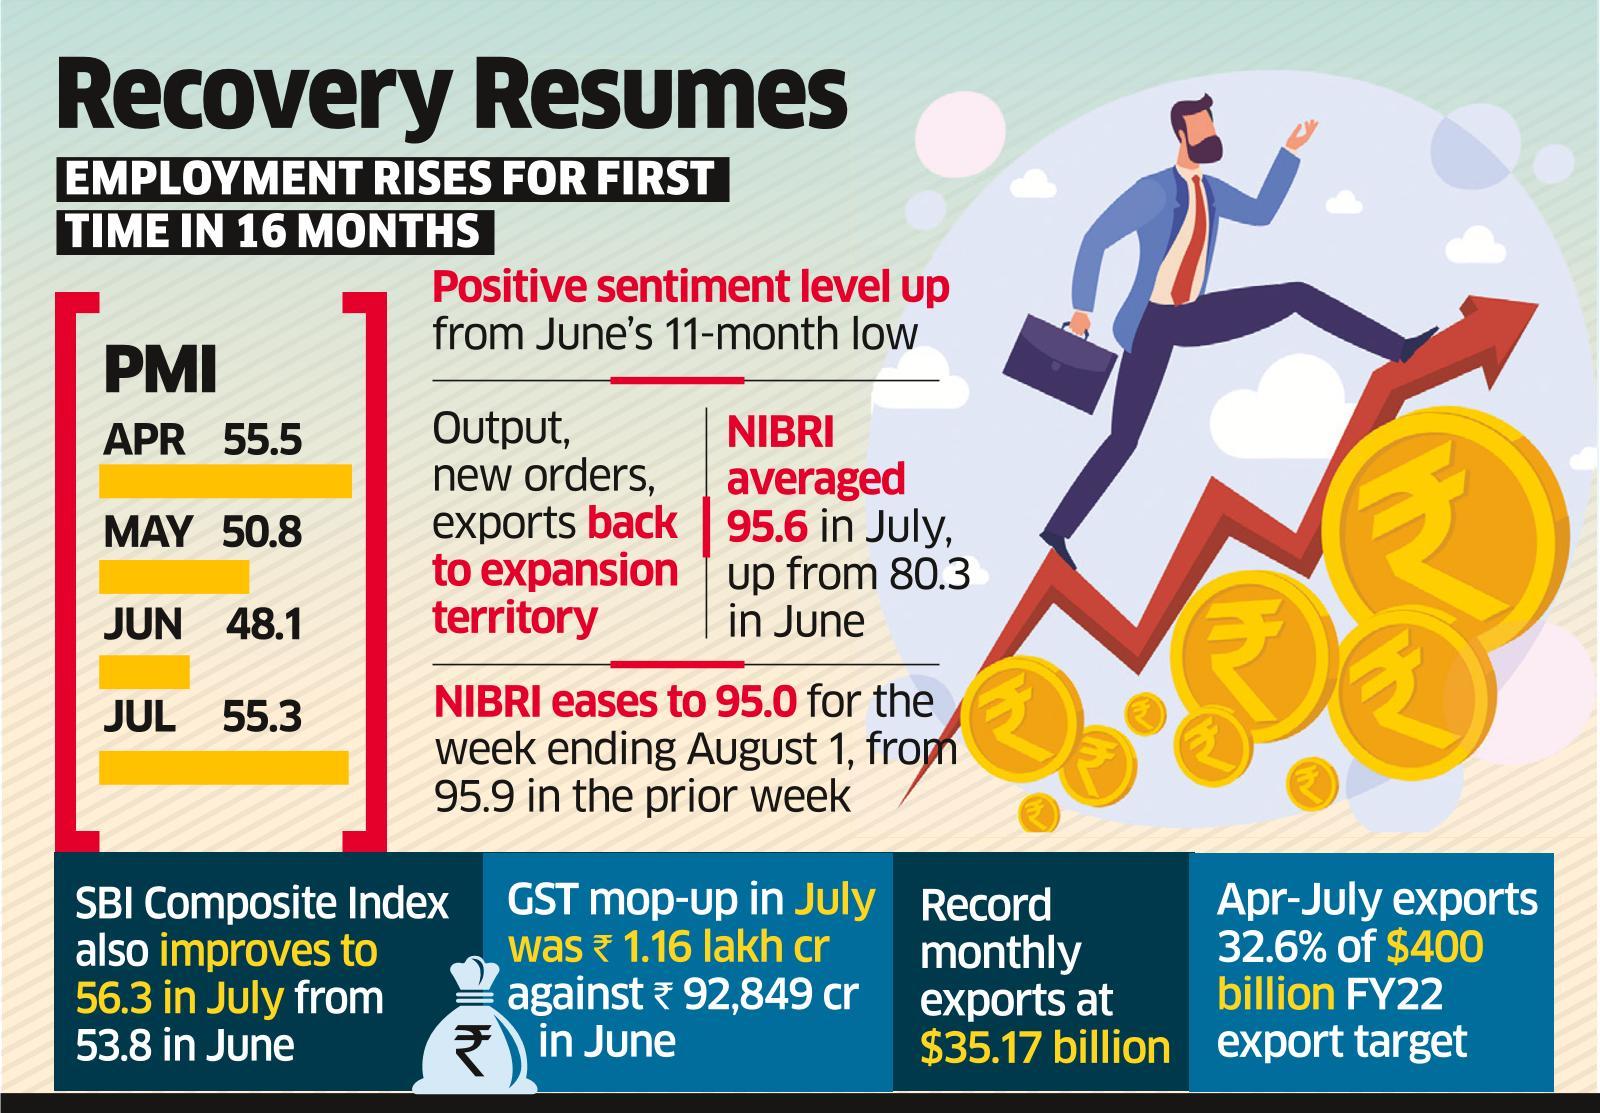 Manufacturing rebounds in July, exports at record high - The Economic Times